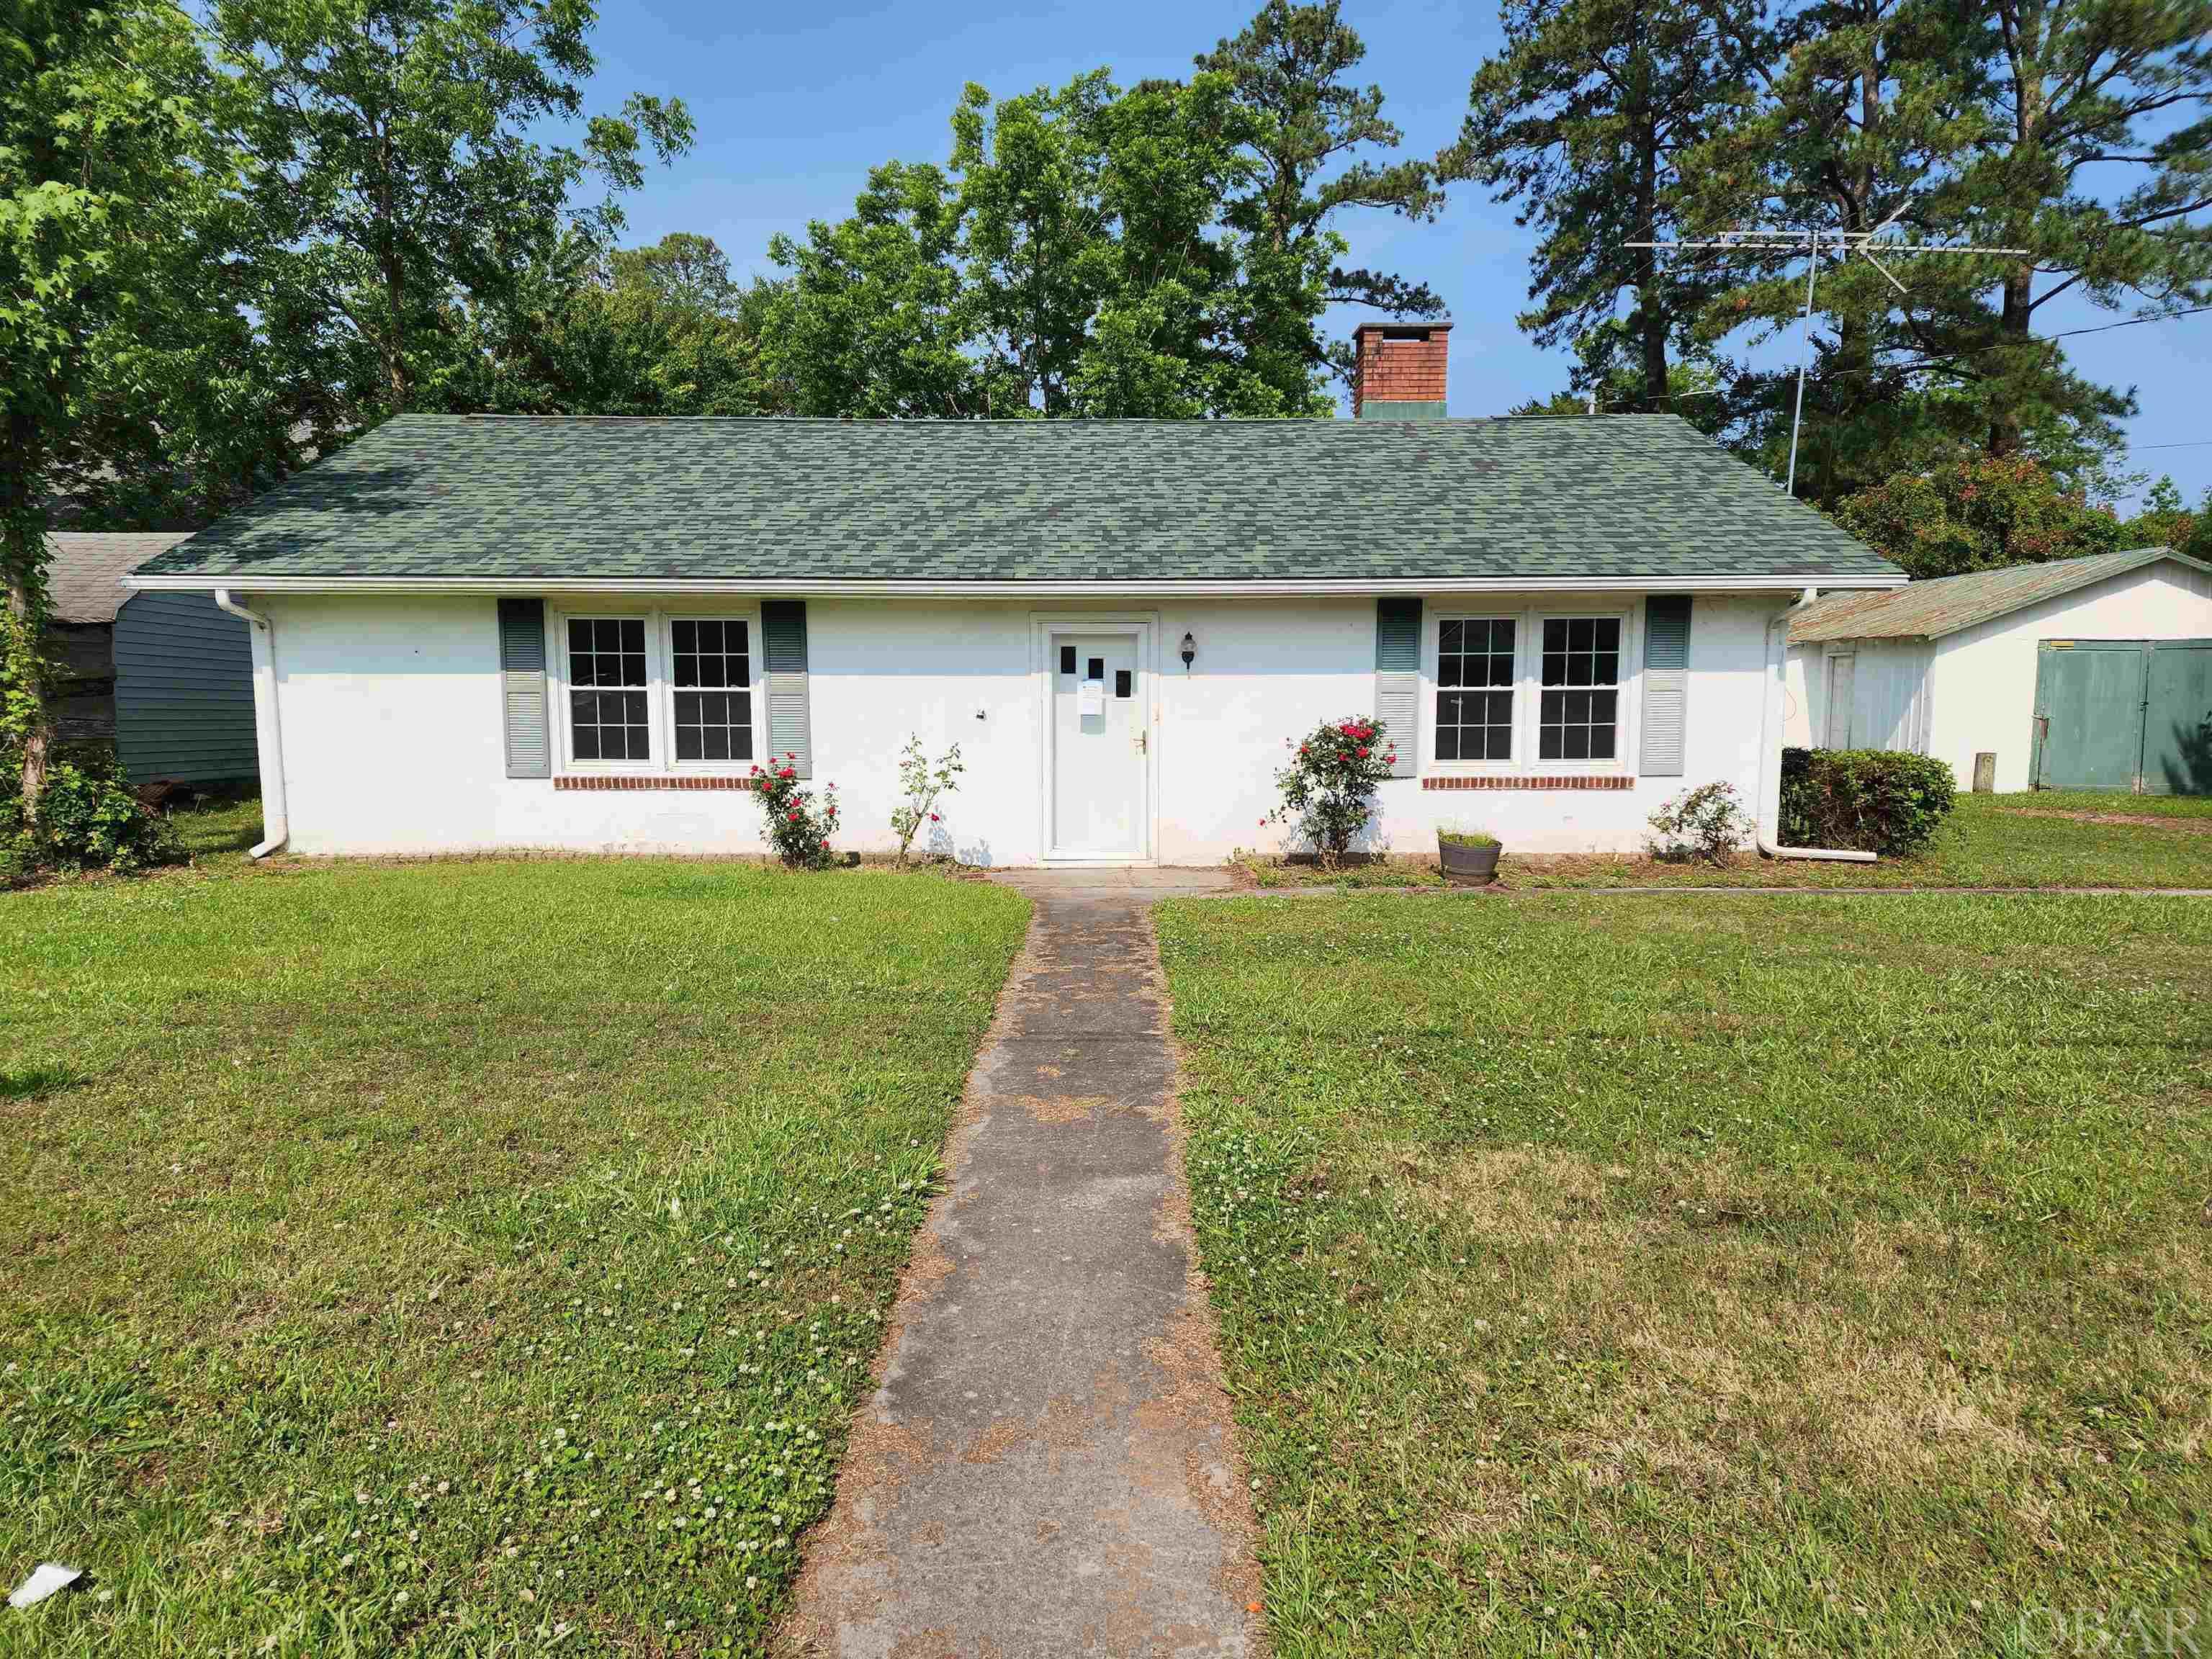 This cozy 2 BR, 1 bath home located within the city limits in the town of Columbia. Located on a low traffic dead-end street. Patio outside back door. Detached garage/workshop & storage shed.  Only short distance to schools, medical center, pharmacy, grocery store, restaurant and other amenities. No more than 45 minutes to beautiful Manteo & OBX! Newer roof and HVAC.